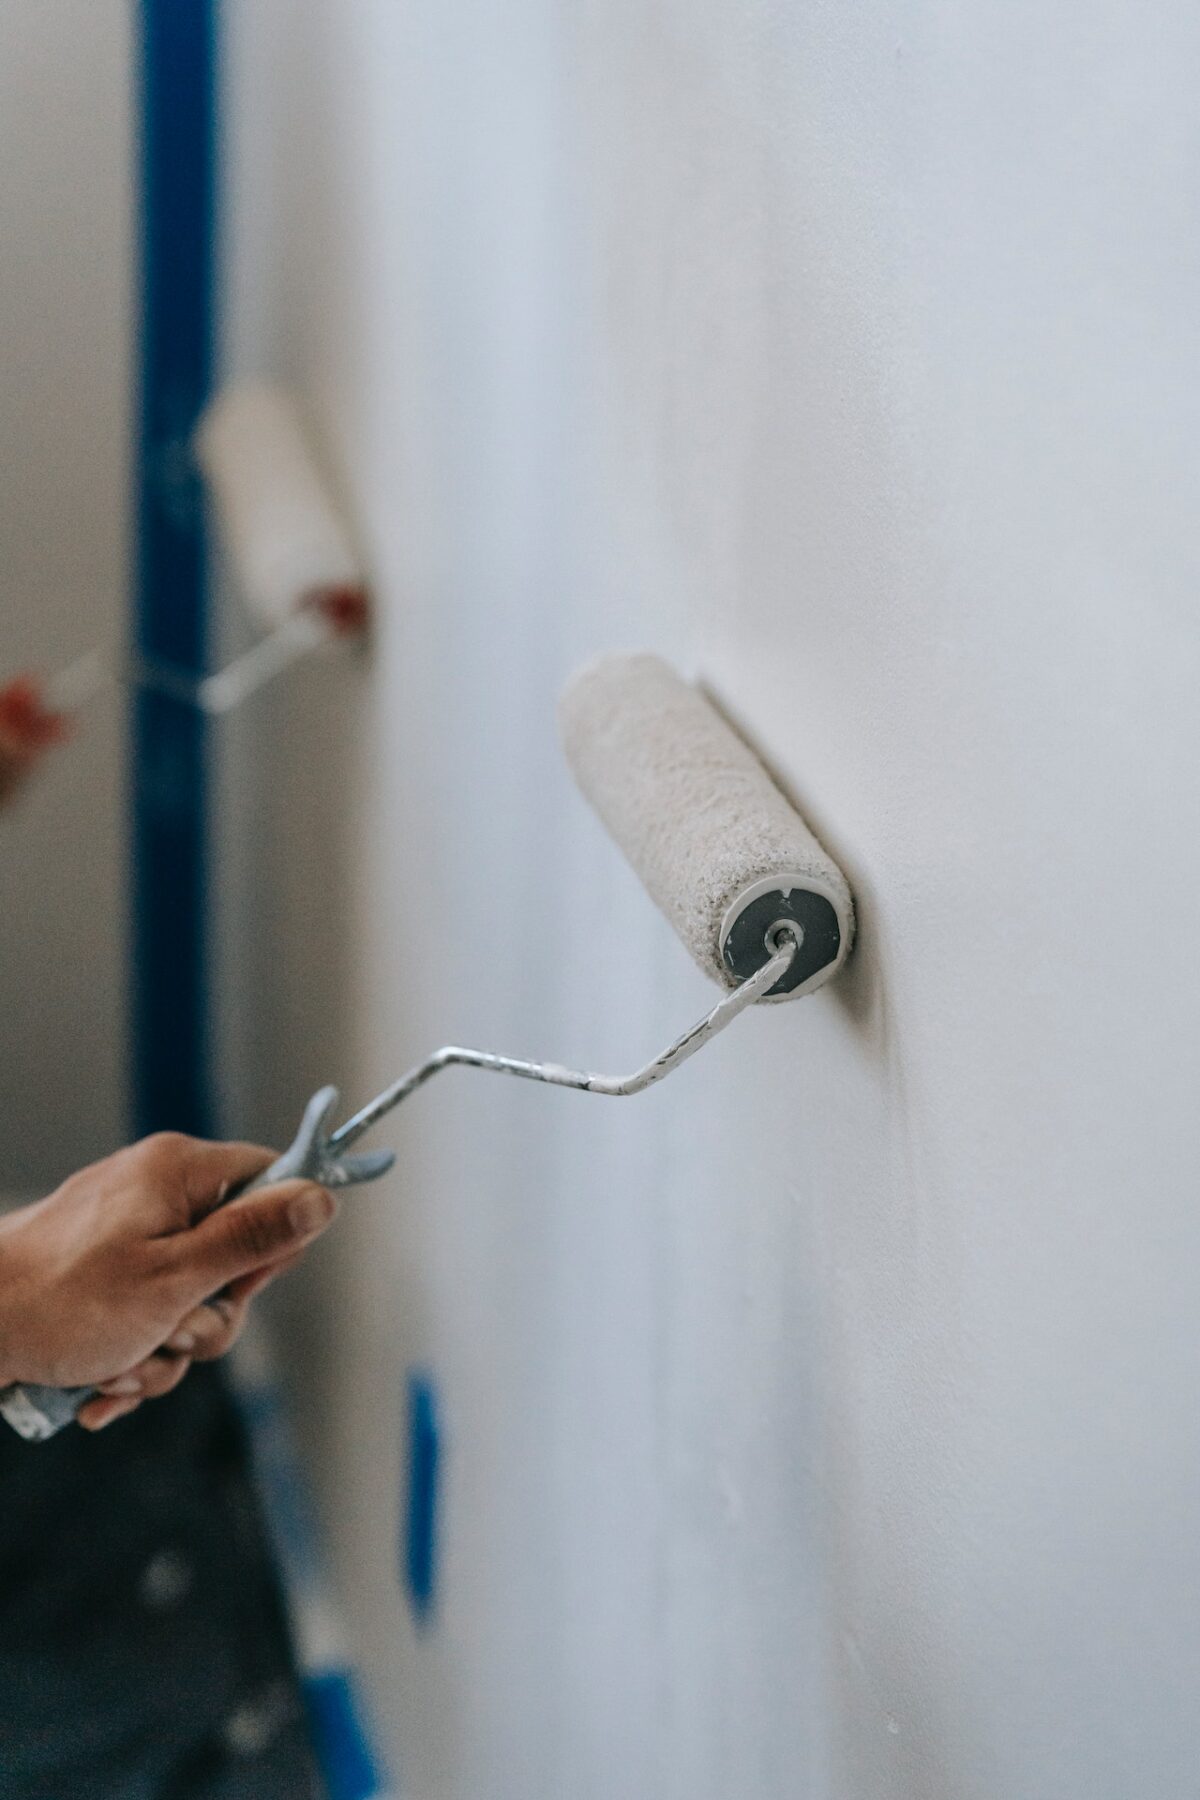 House Painting Services Dubai: Transforming Homes with Expertise